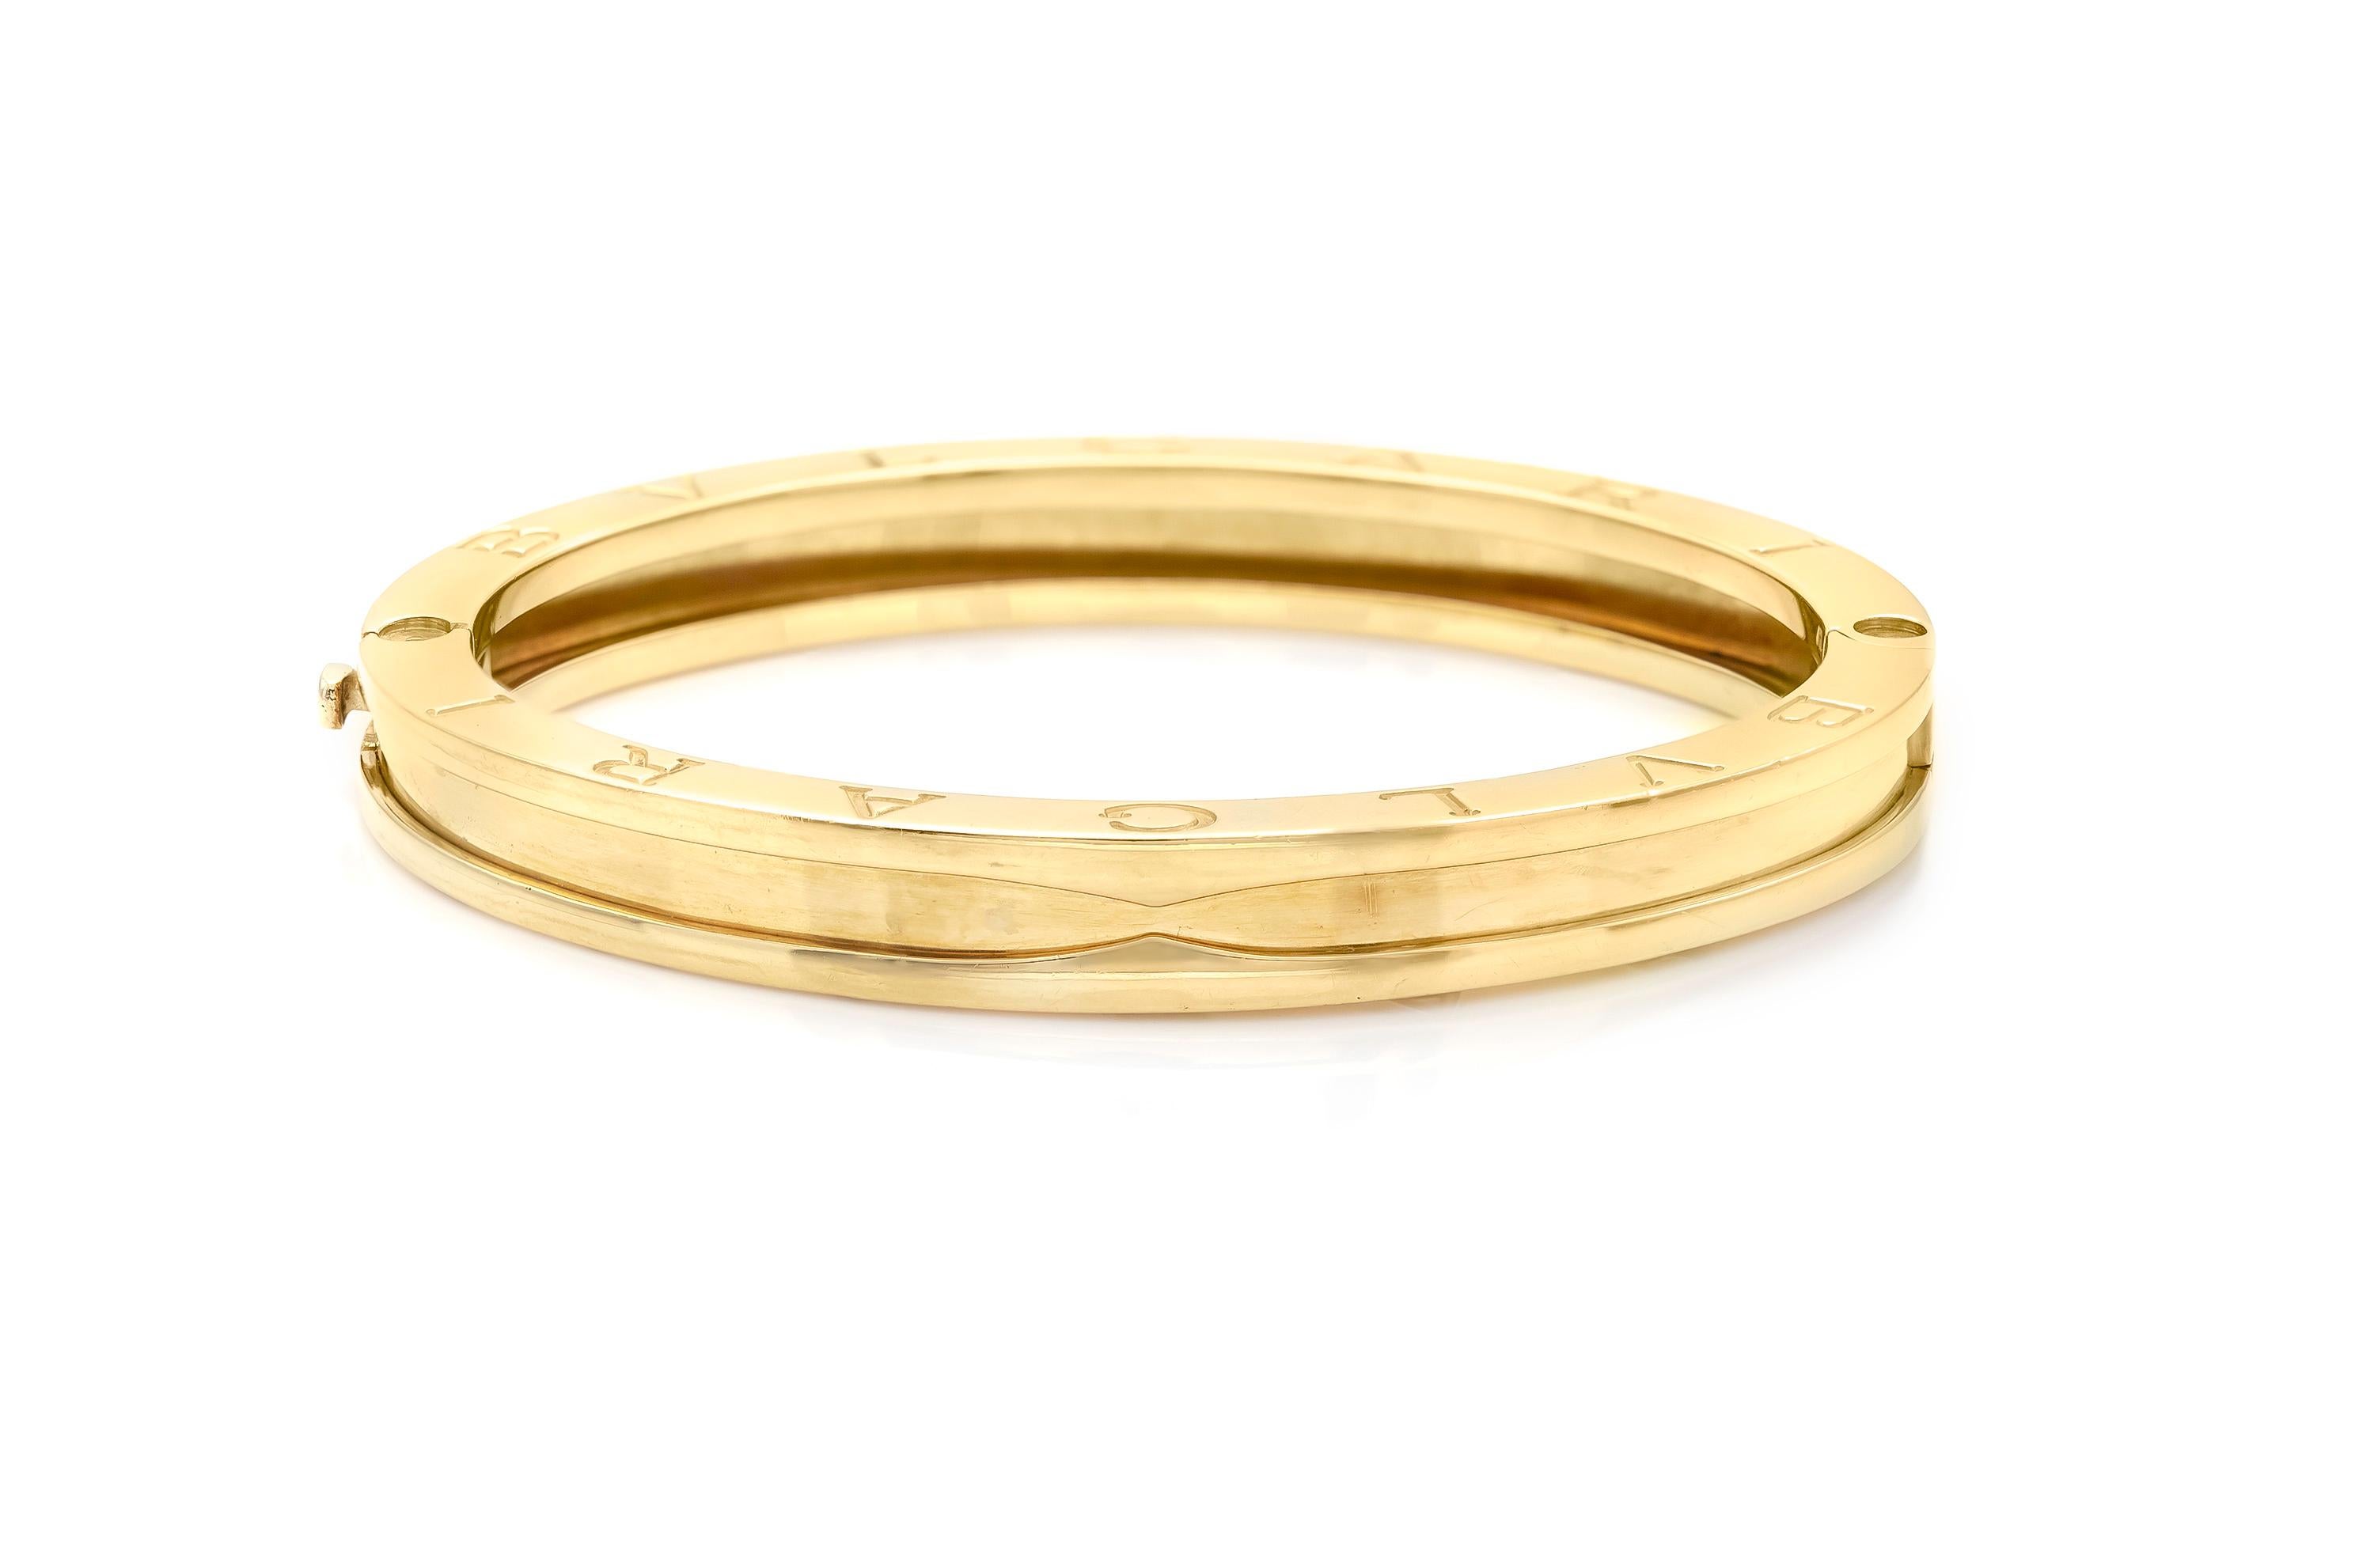 Finely crafted in 18K yellow gold.
Signed by Bvlgari.
Size 16 ( 6 1/4